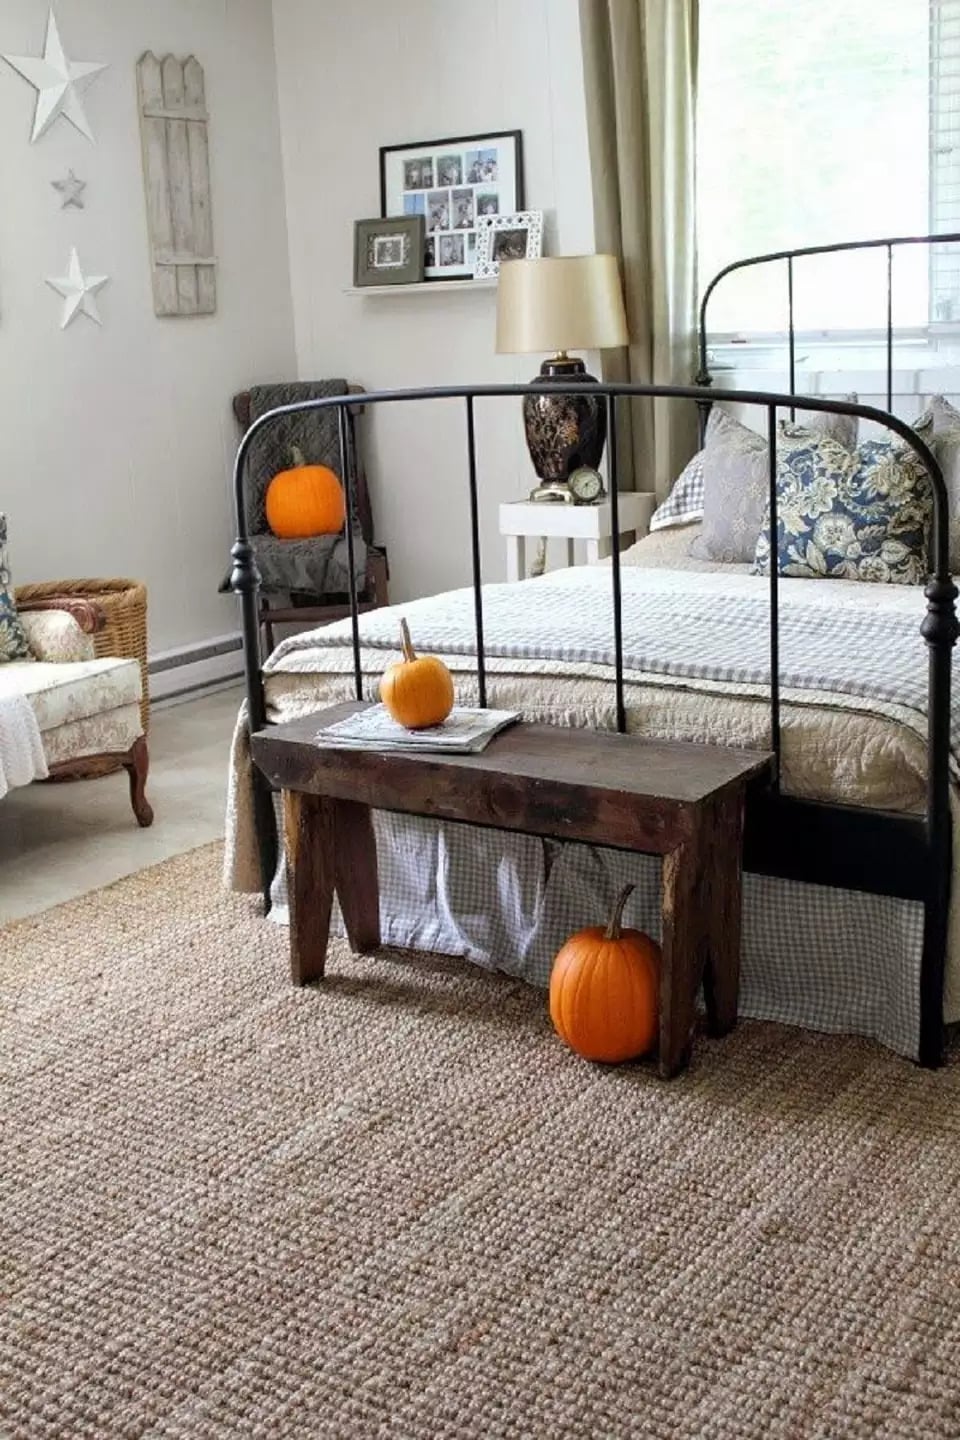 old bed frame farmhouse decorating ideas